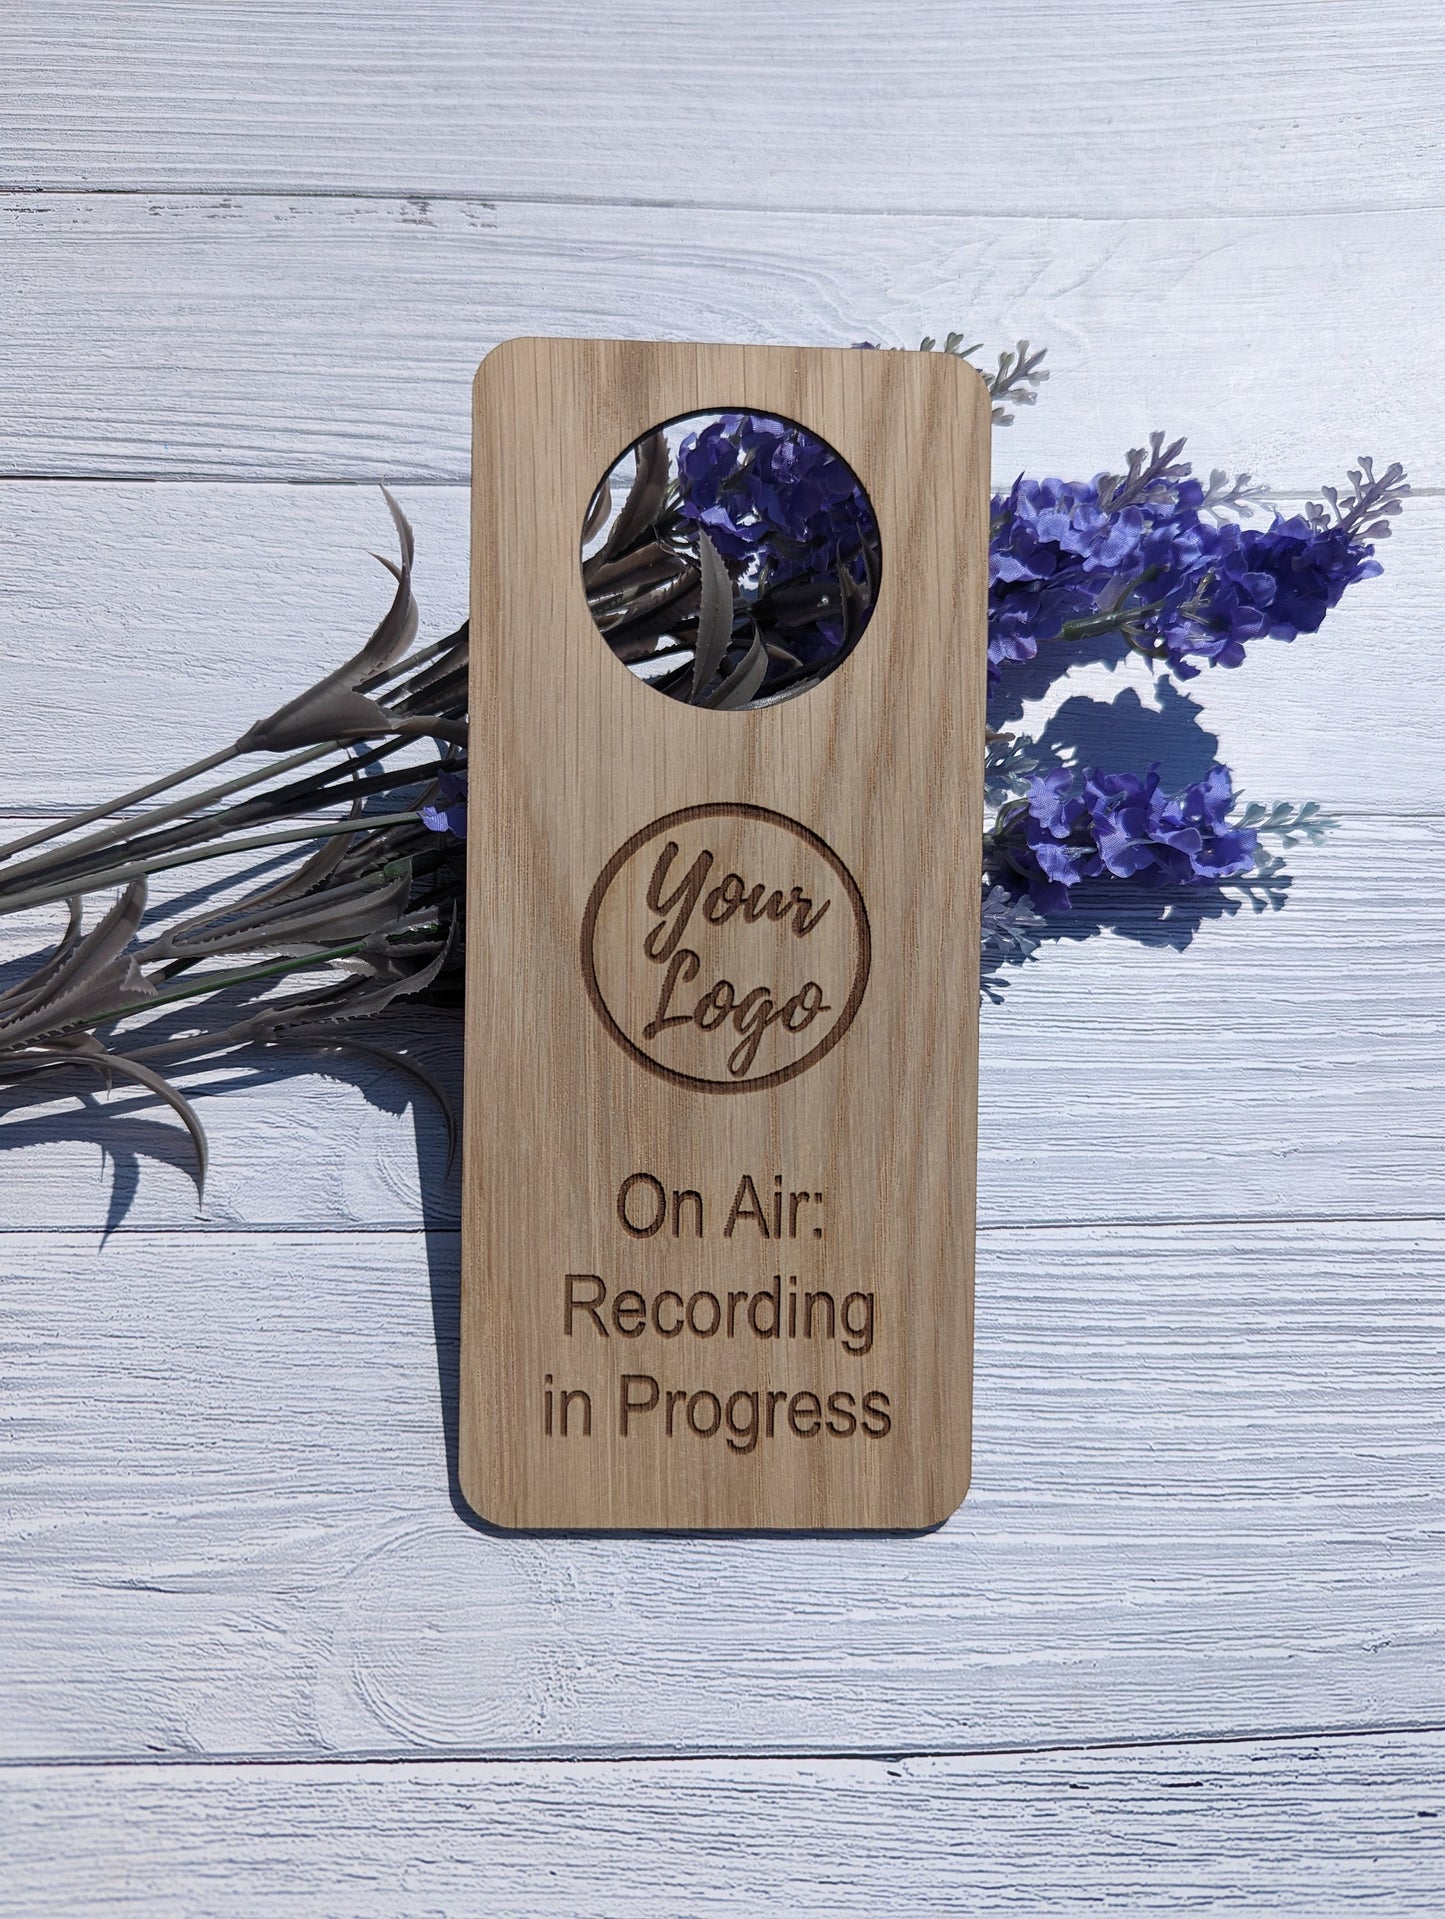 On Air: Recording in Progress, Do Not Disturb - Wooden Door Hanger, Personalised Sign,  Podcaster, Musician, Voice-over, or Content Creator